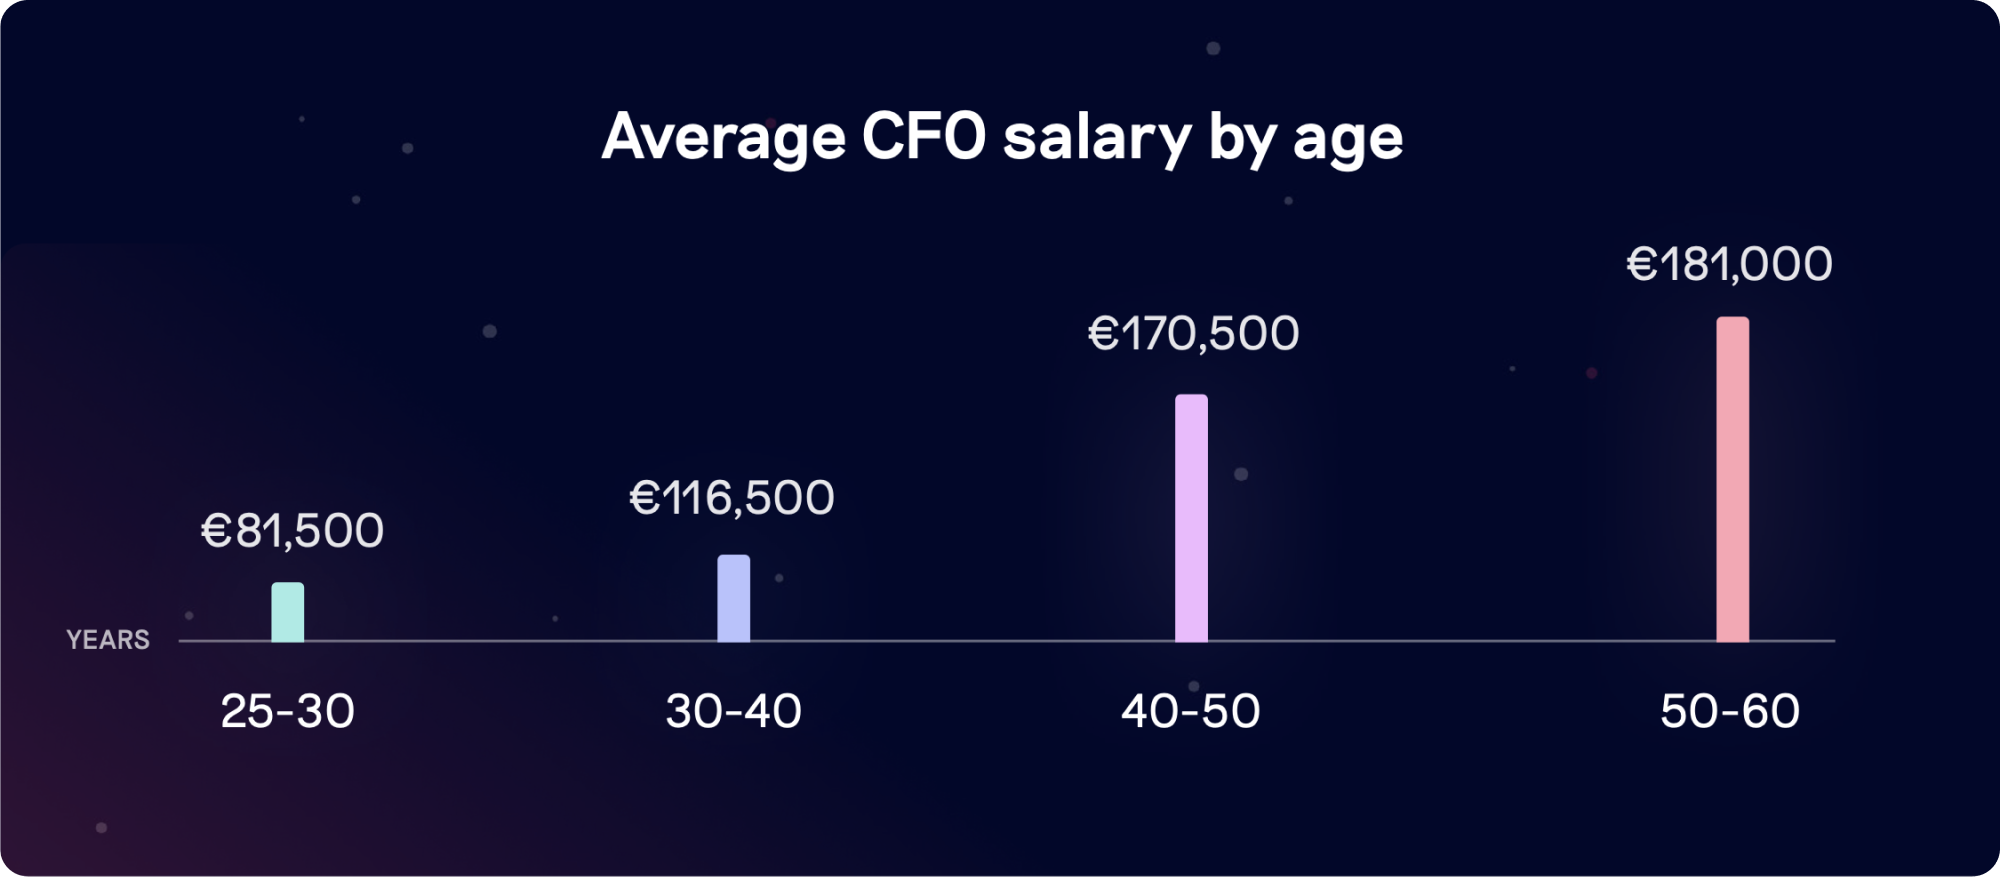 CFO salary by age